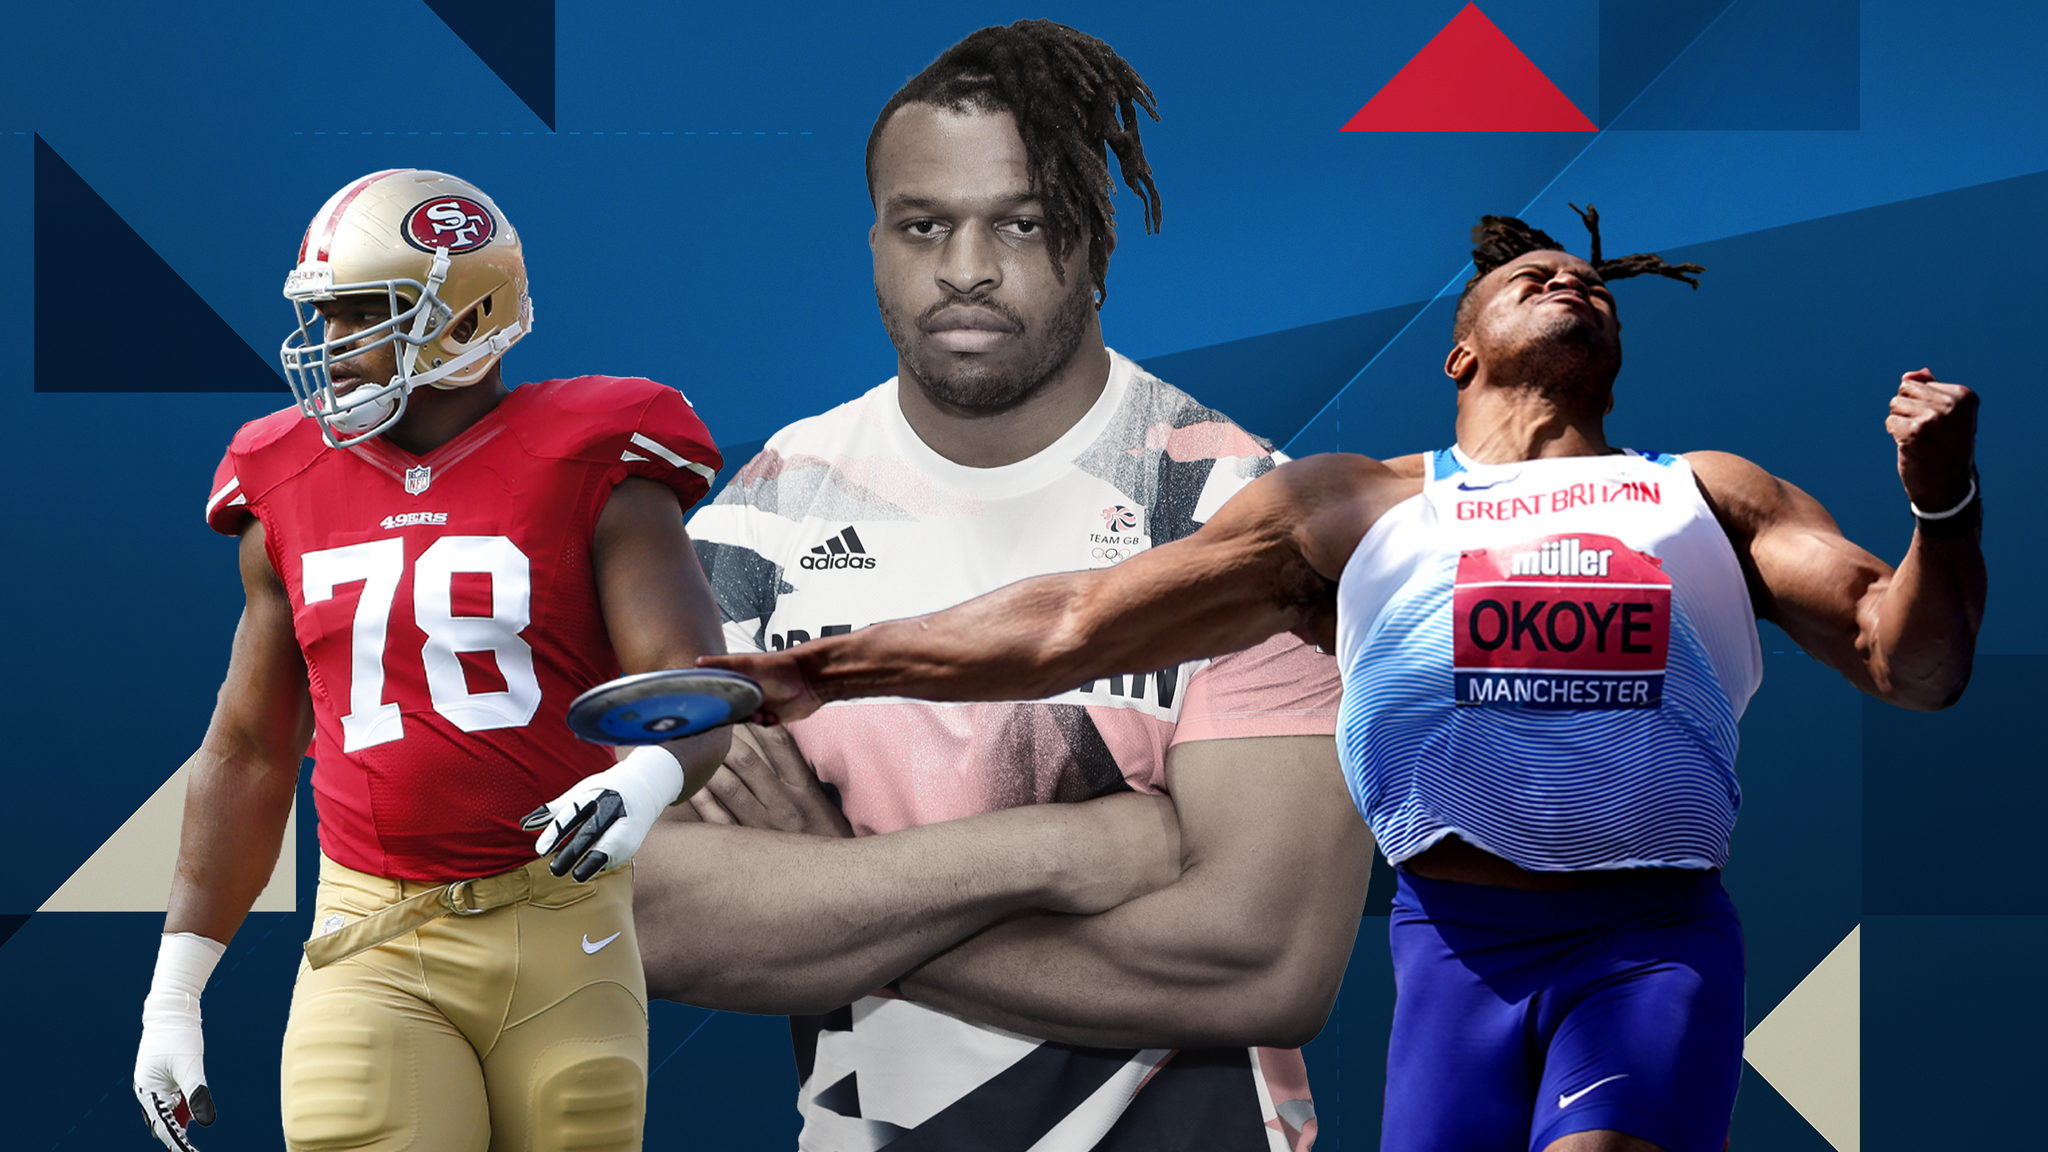 Lawrence Okoye: The incredible journey of Team GB athlete who turned down  Oxford and sought NFL stardom before Tokyo Olympics, UK News